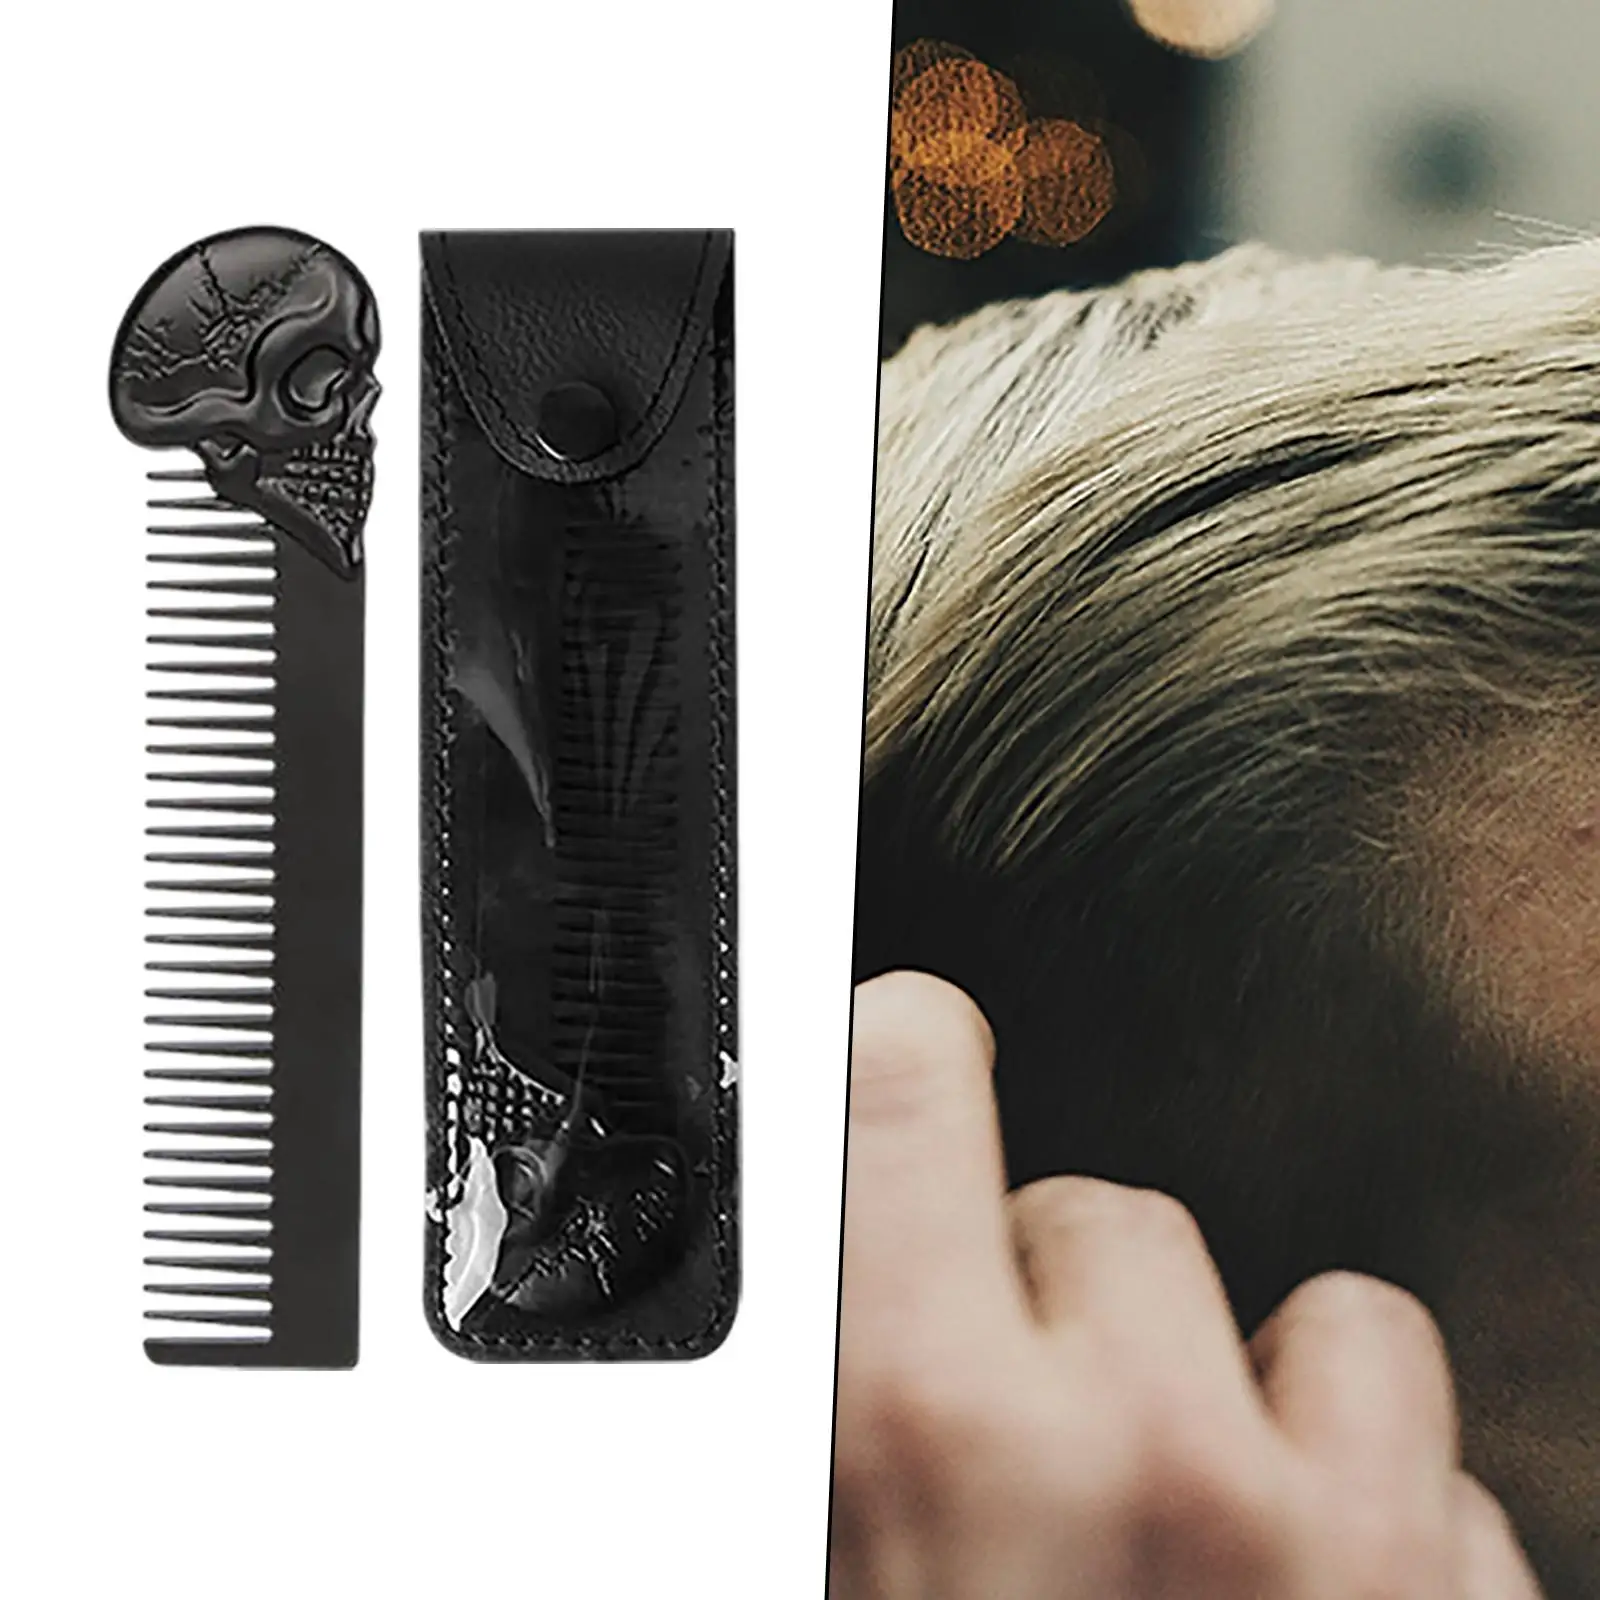 Beard Comb for Men Smooth Round Beard Shaping Template, Barber